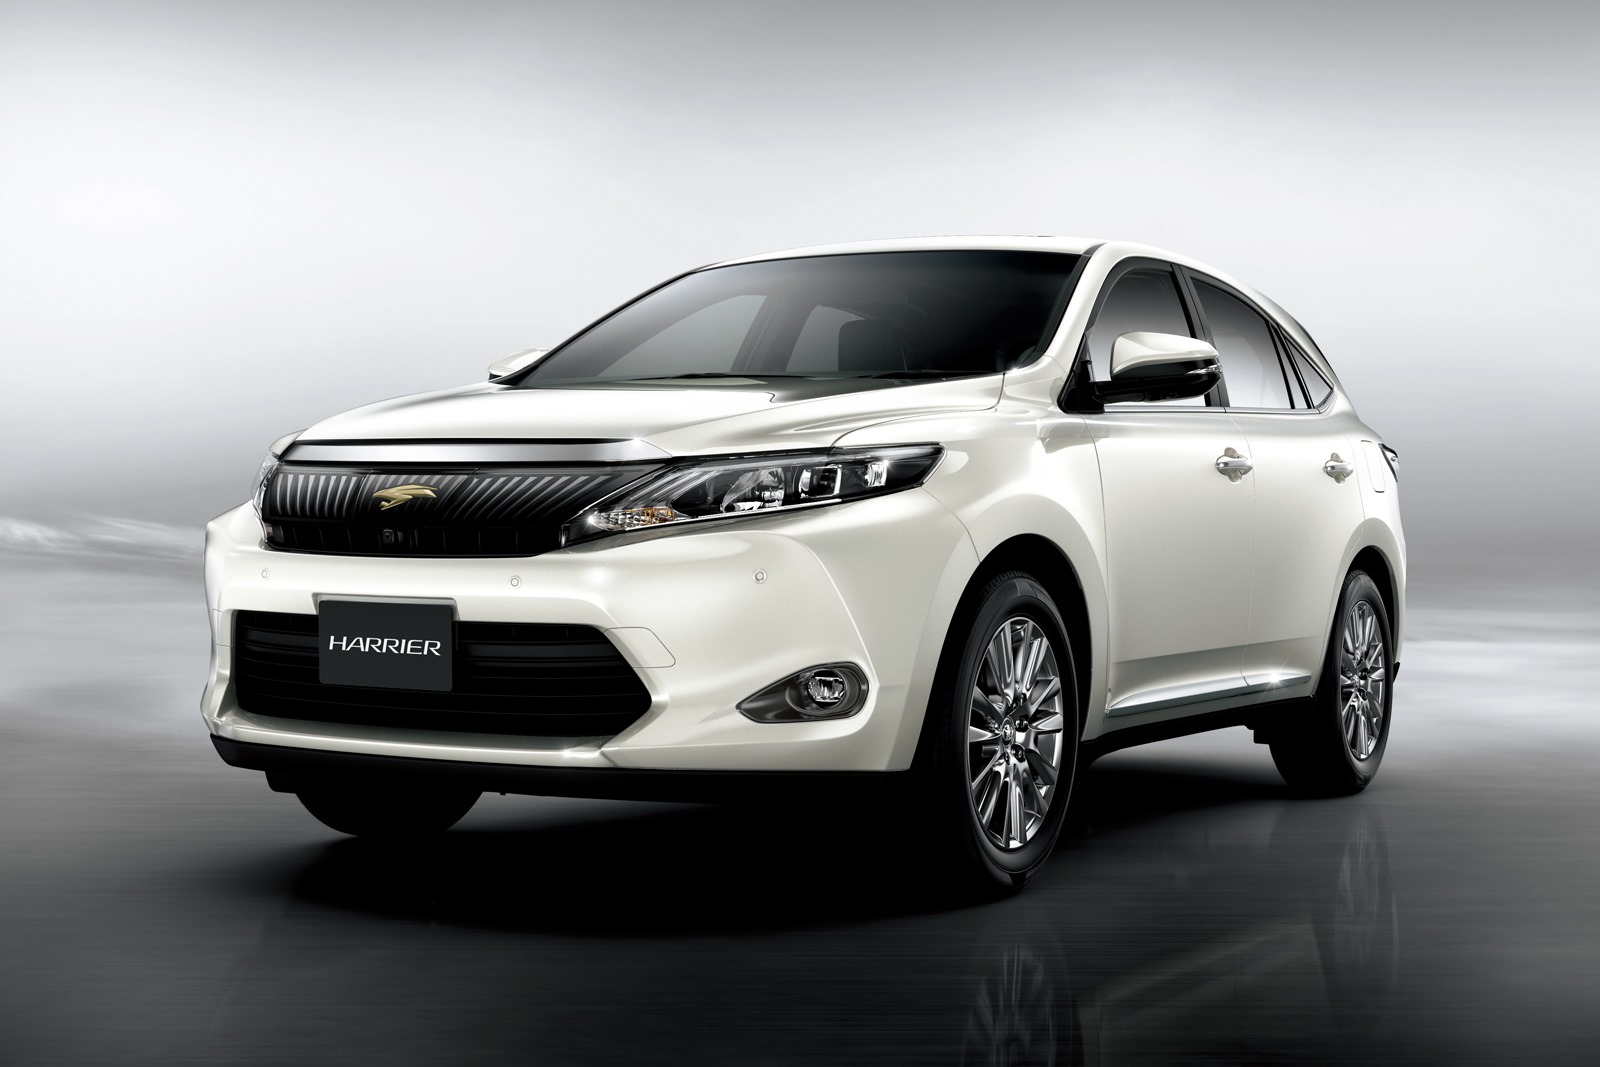 New Toyota Harrier SUV  photo gallery Autocar India